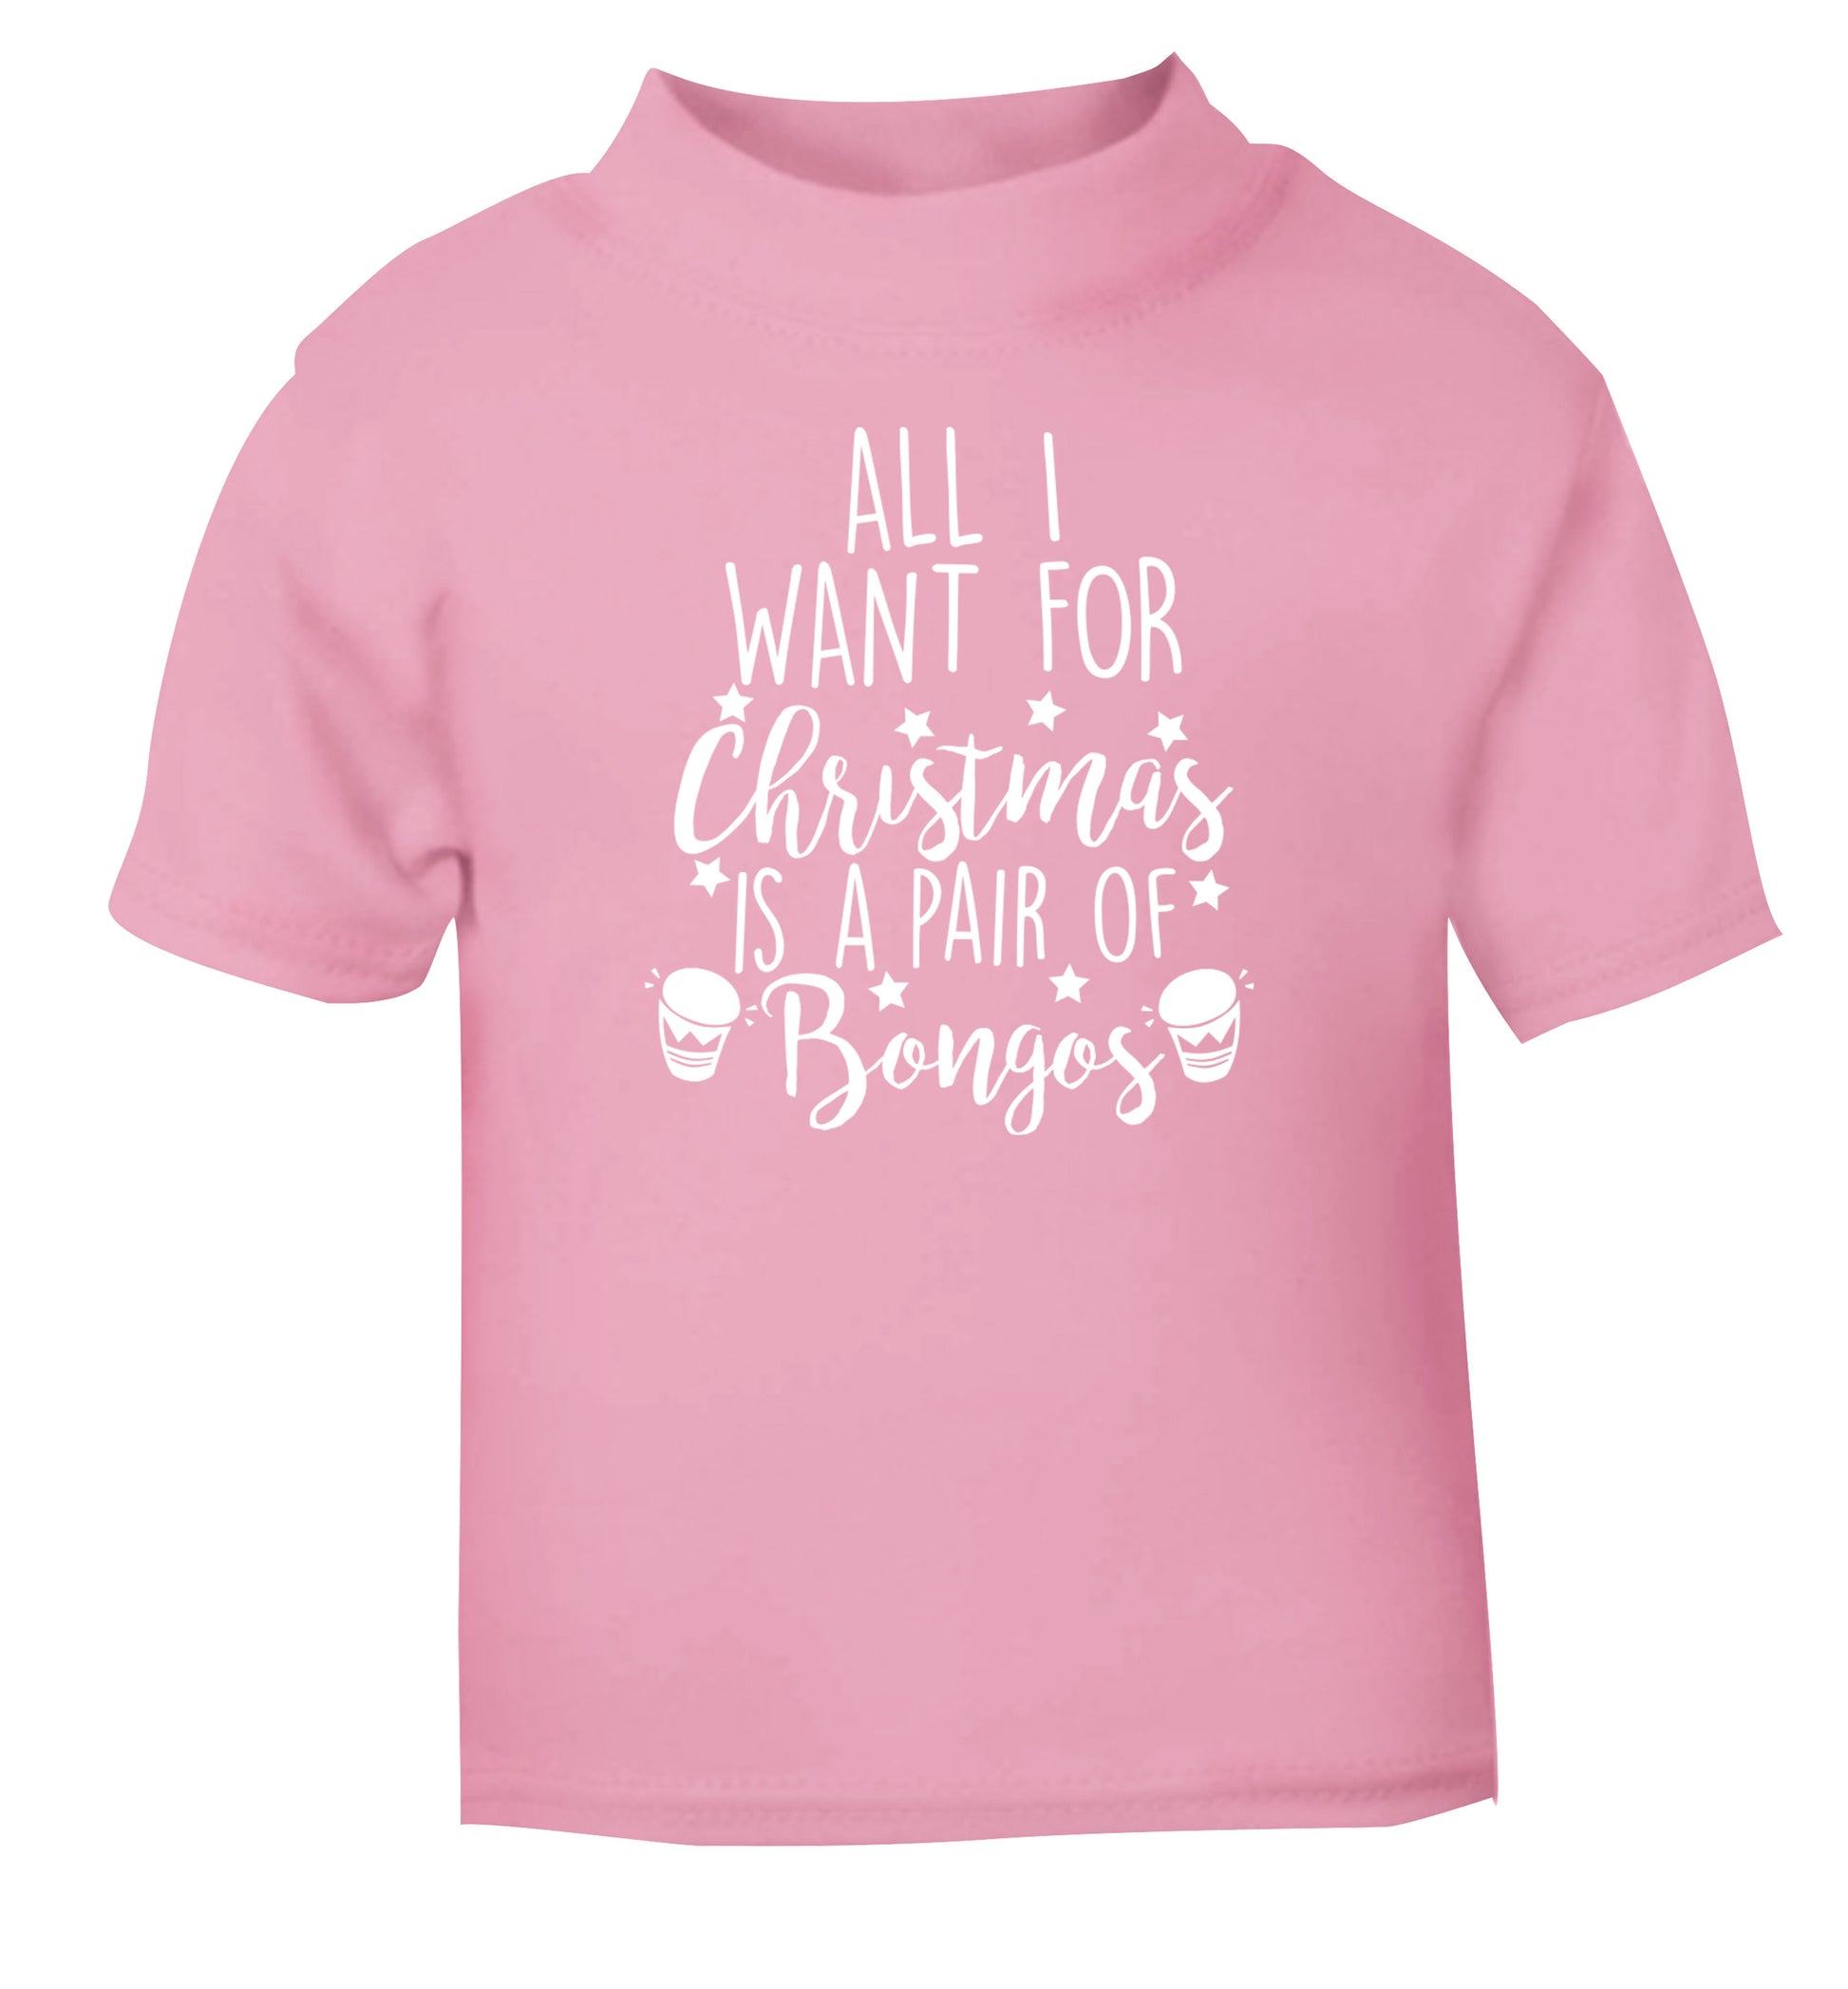 All I want for Christmas is a pair of bongos! light pink Baby Toddler Tshirt 2 Years